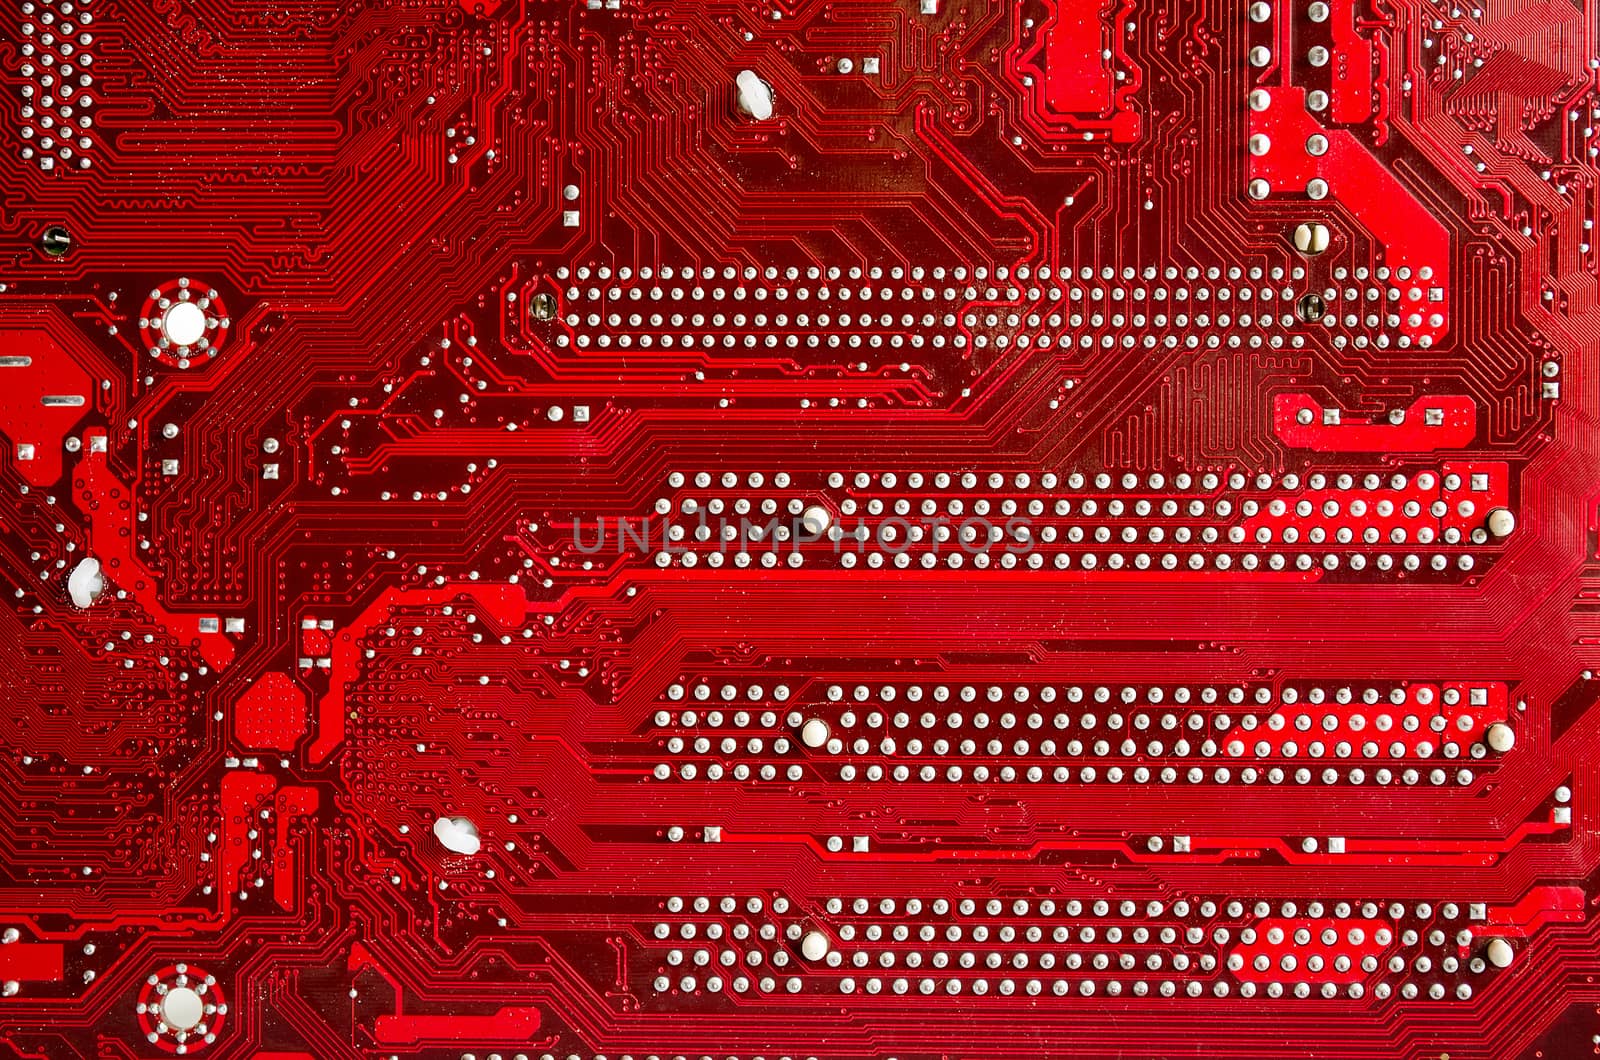 Red Motherboard by eenevski